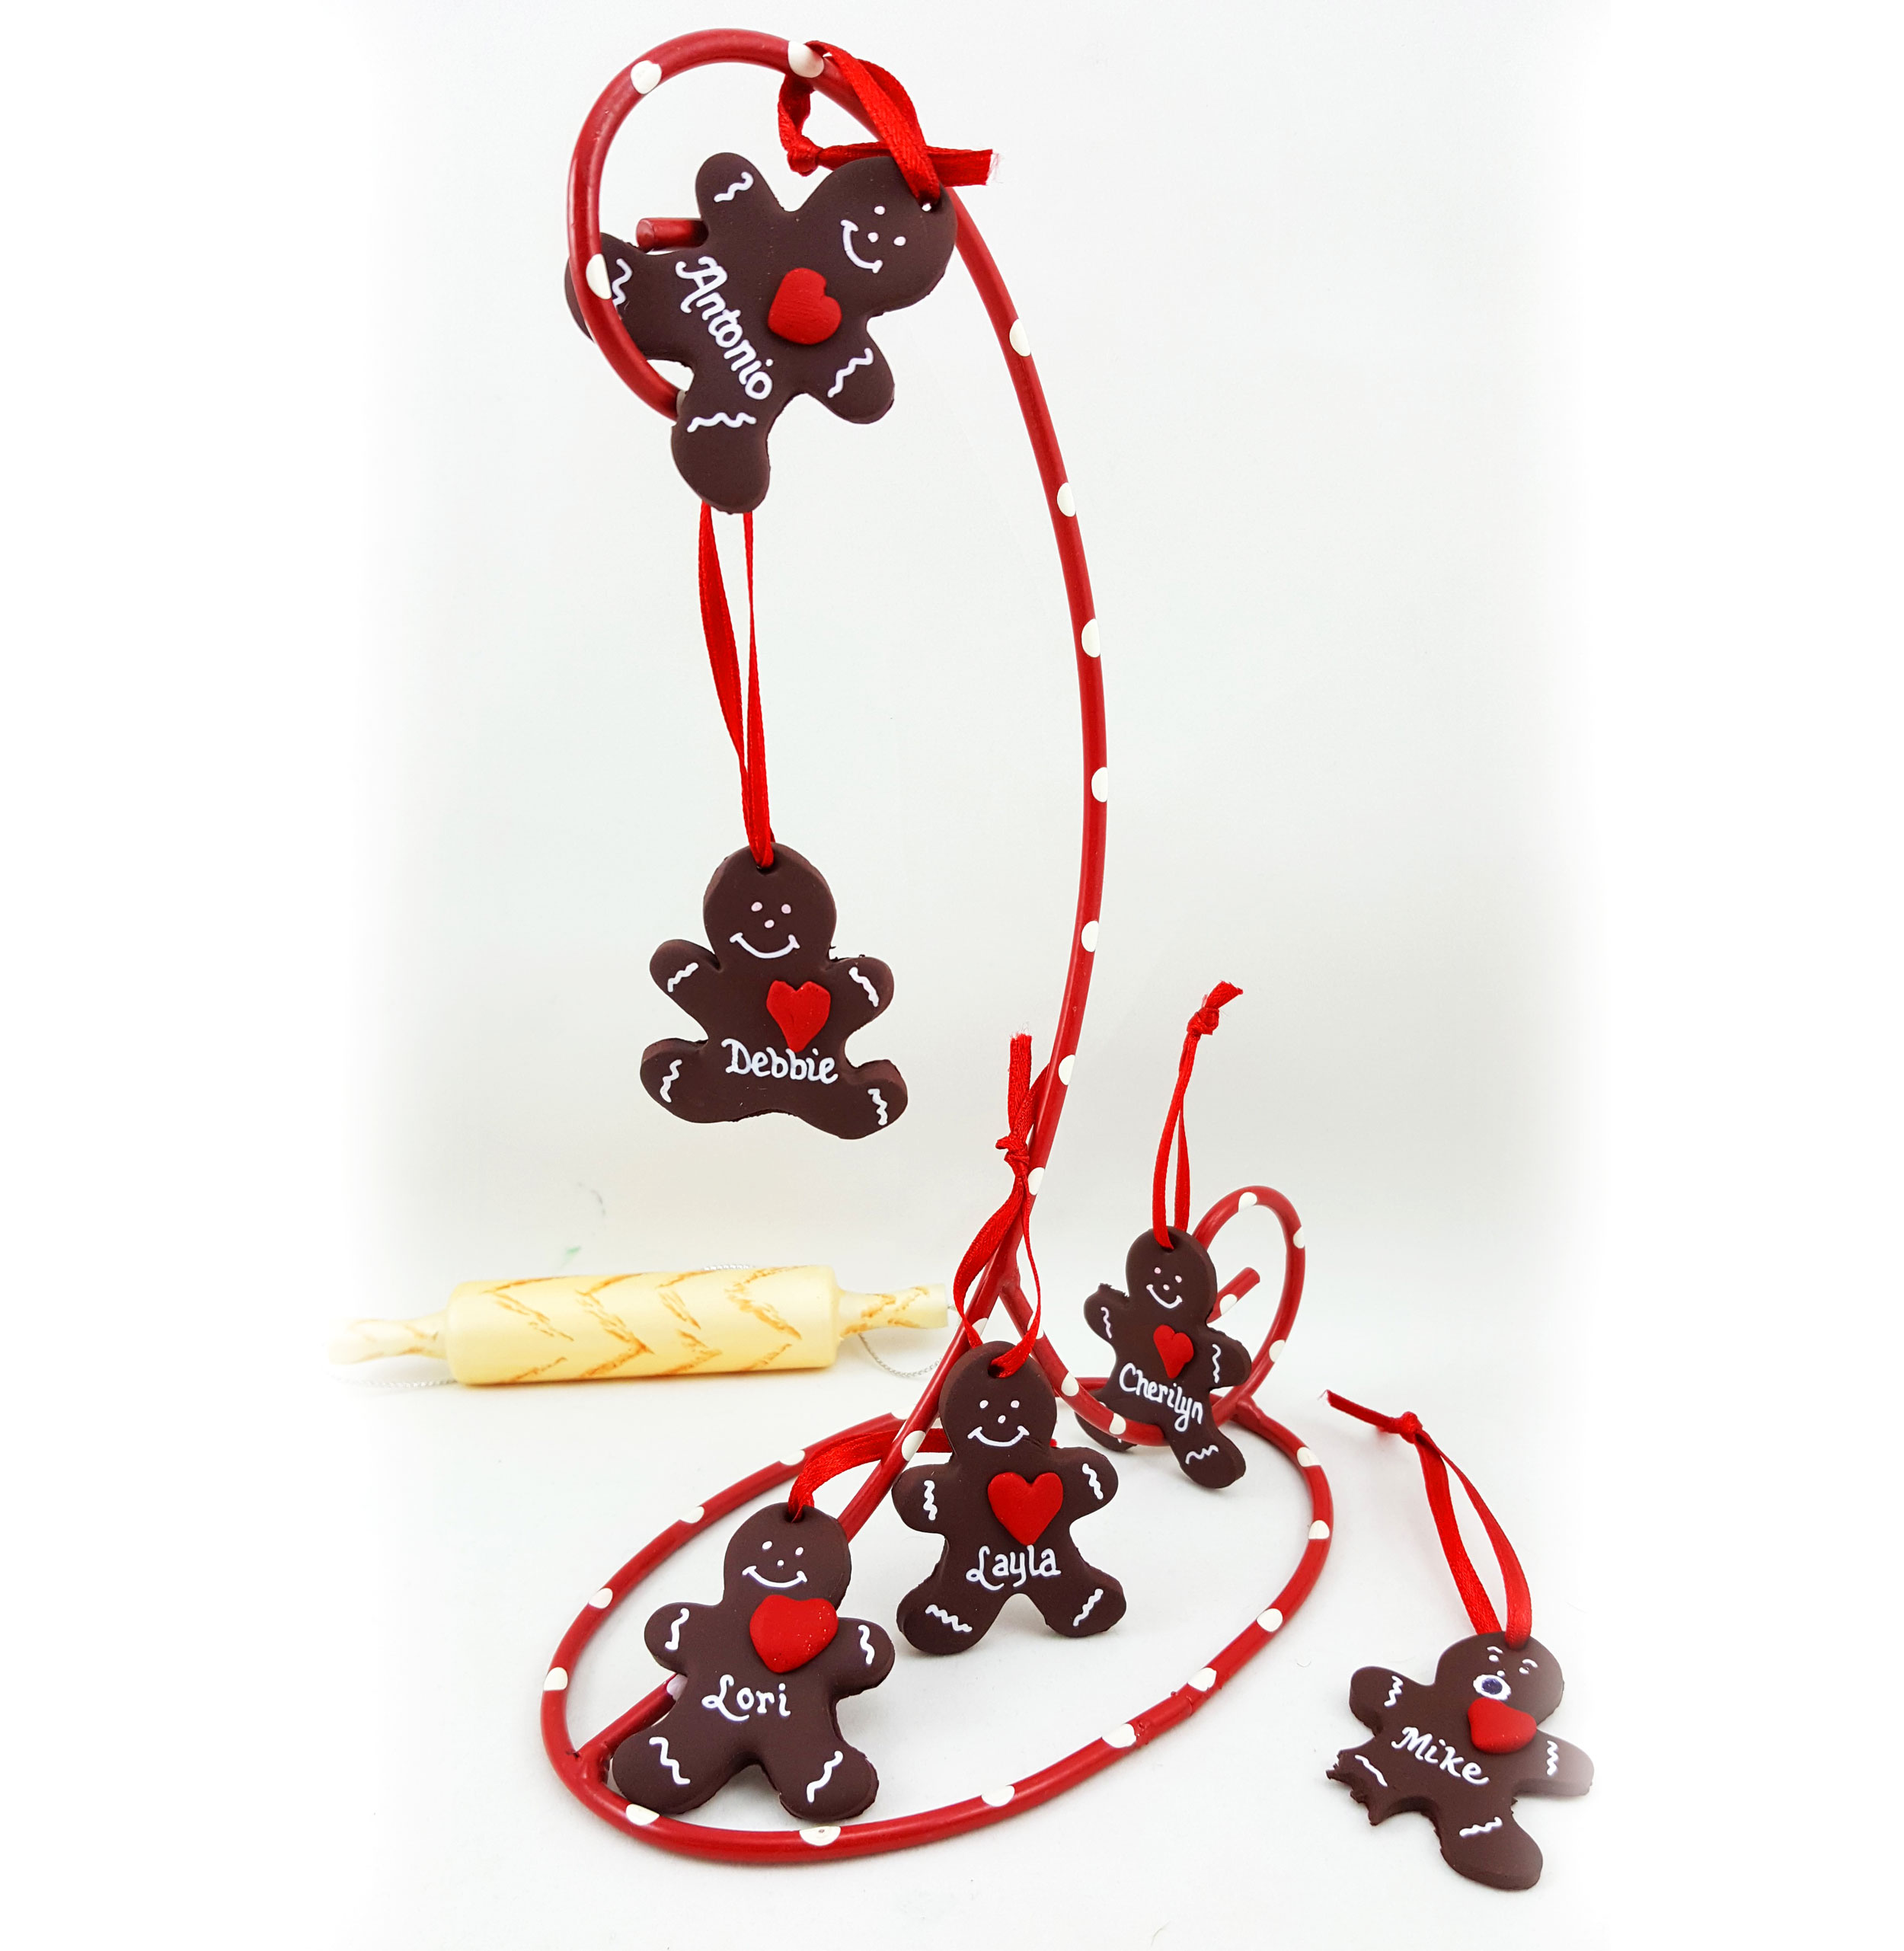 A small army of little gingerbread men hang from a candy cane ornament display hanger, with a variety of cute expressions such as one with a leg that was bitten | OrnamentShop.com